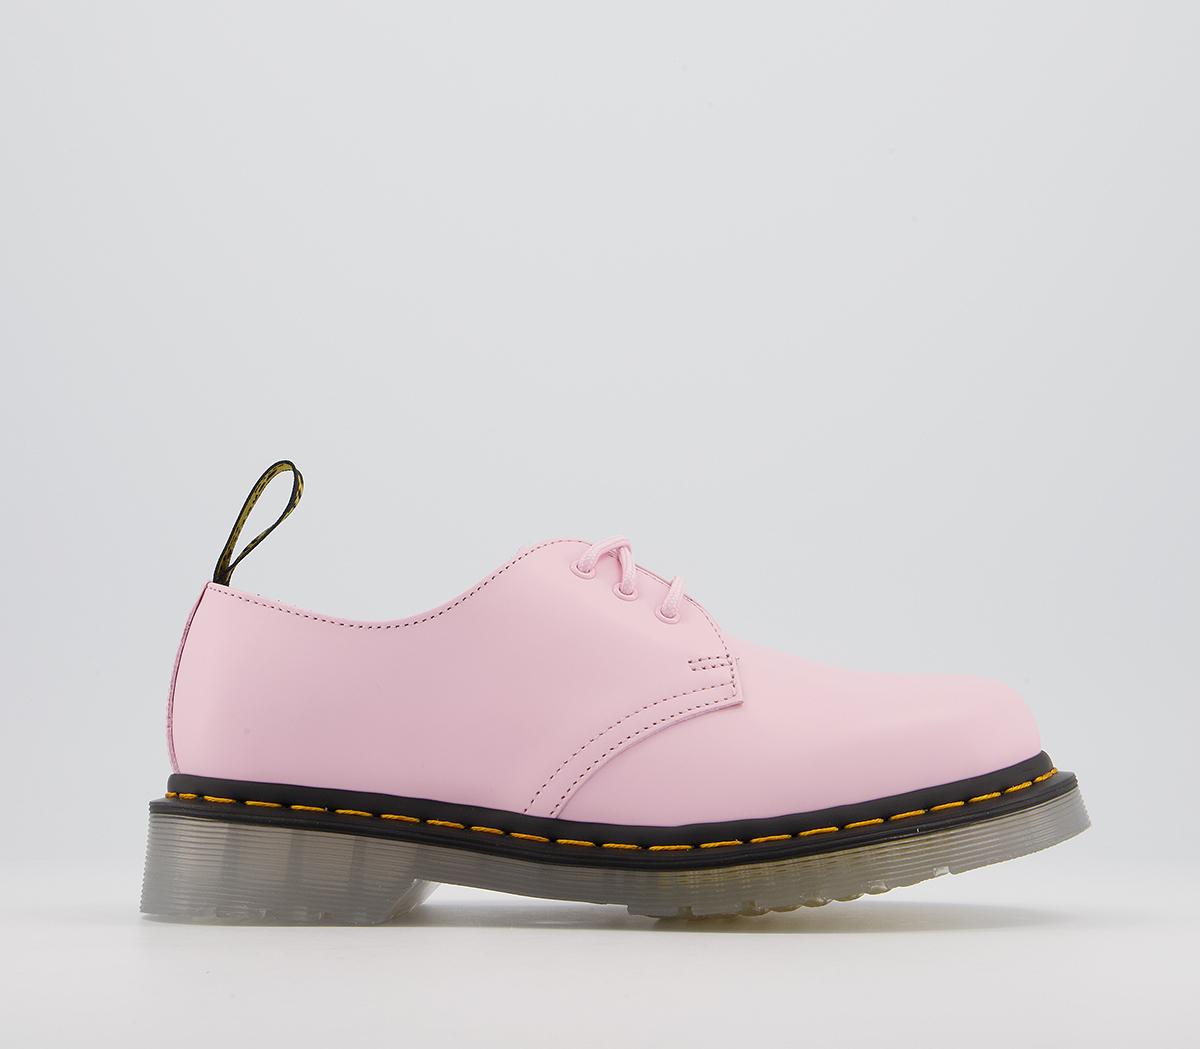 Dr. Martens 1461 Ice 3 Eye Shoes Pale Pink - Flat Shoes for Women